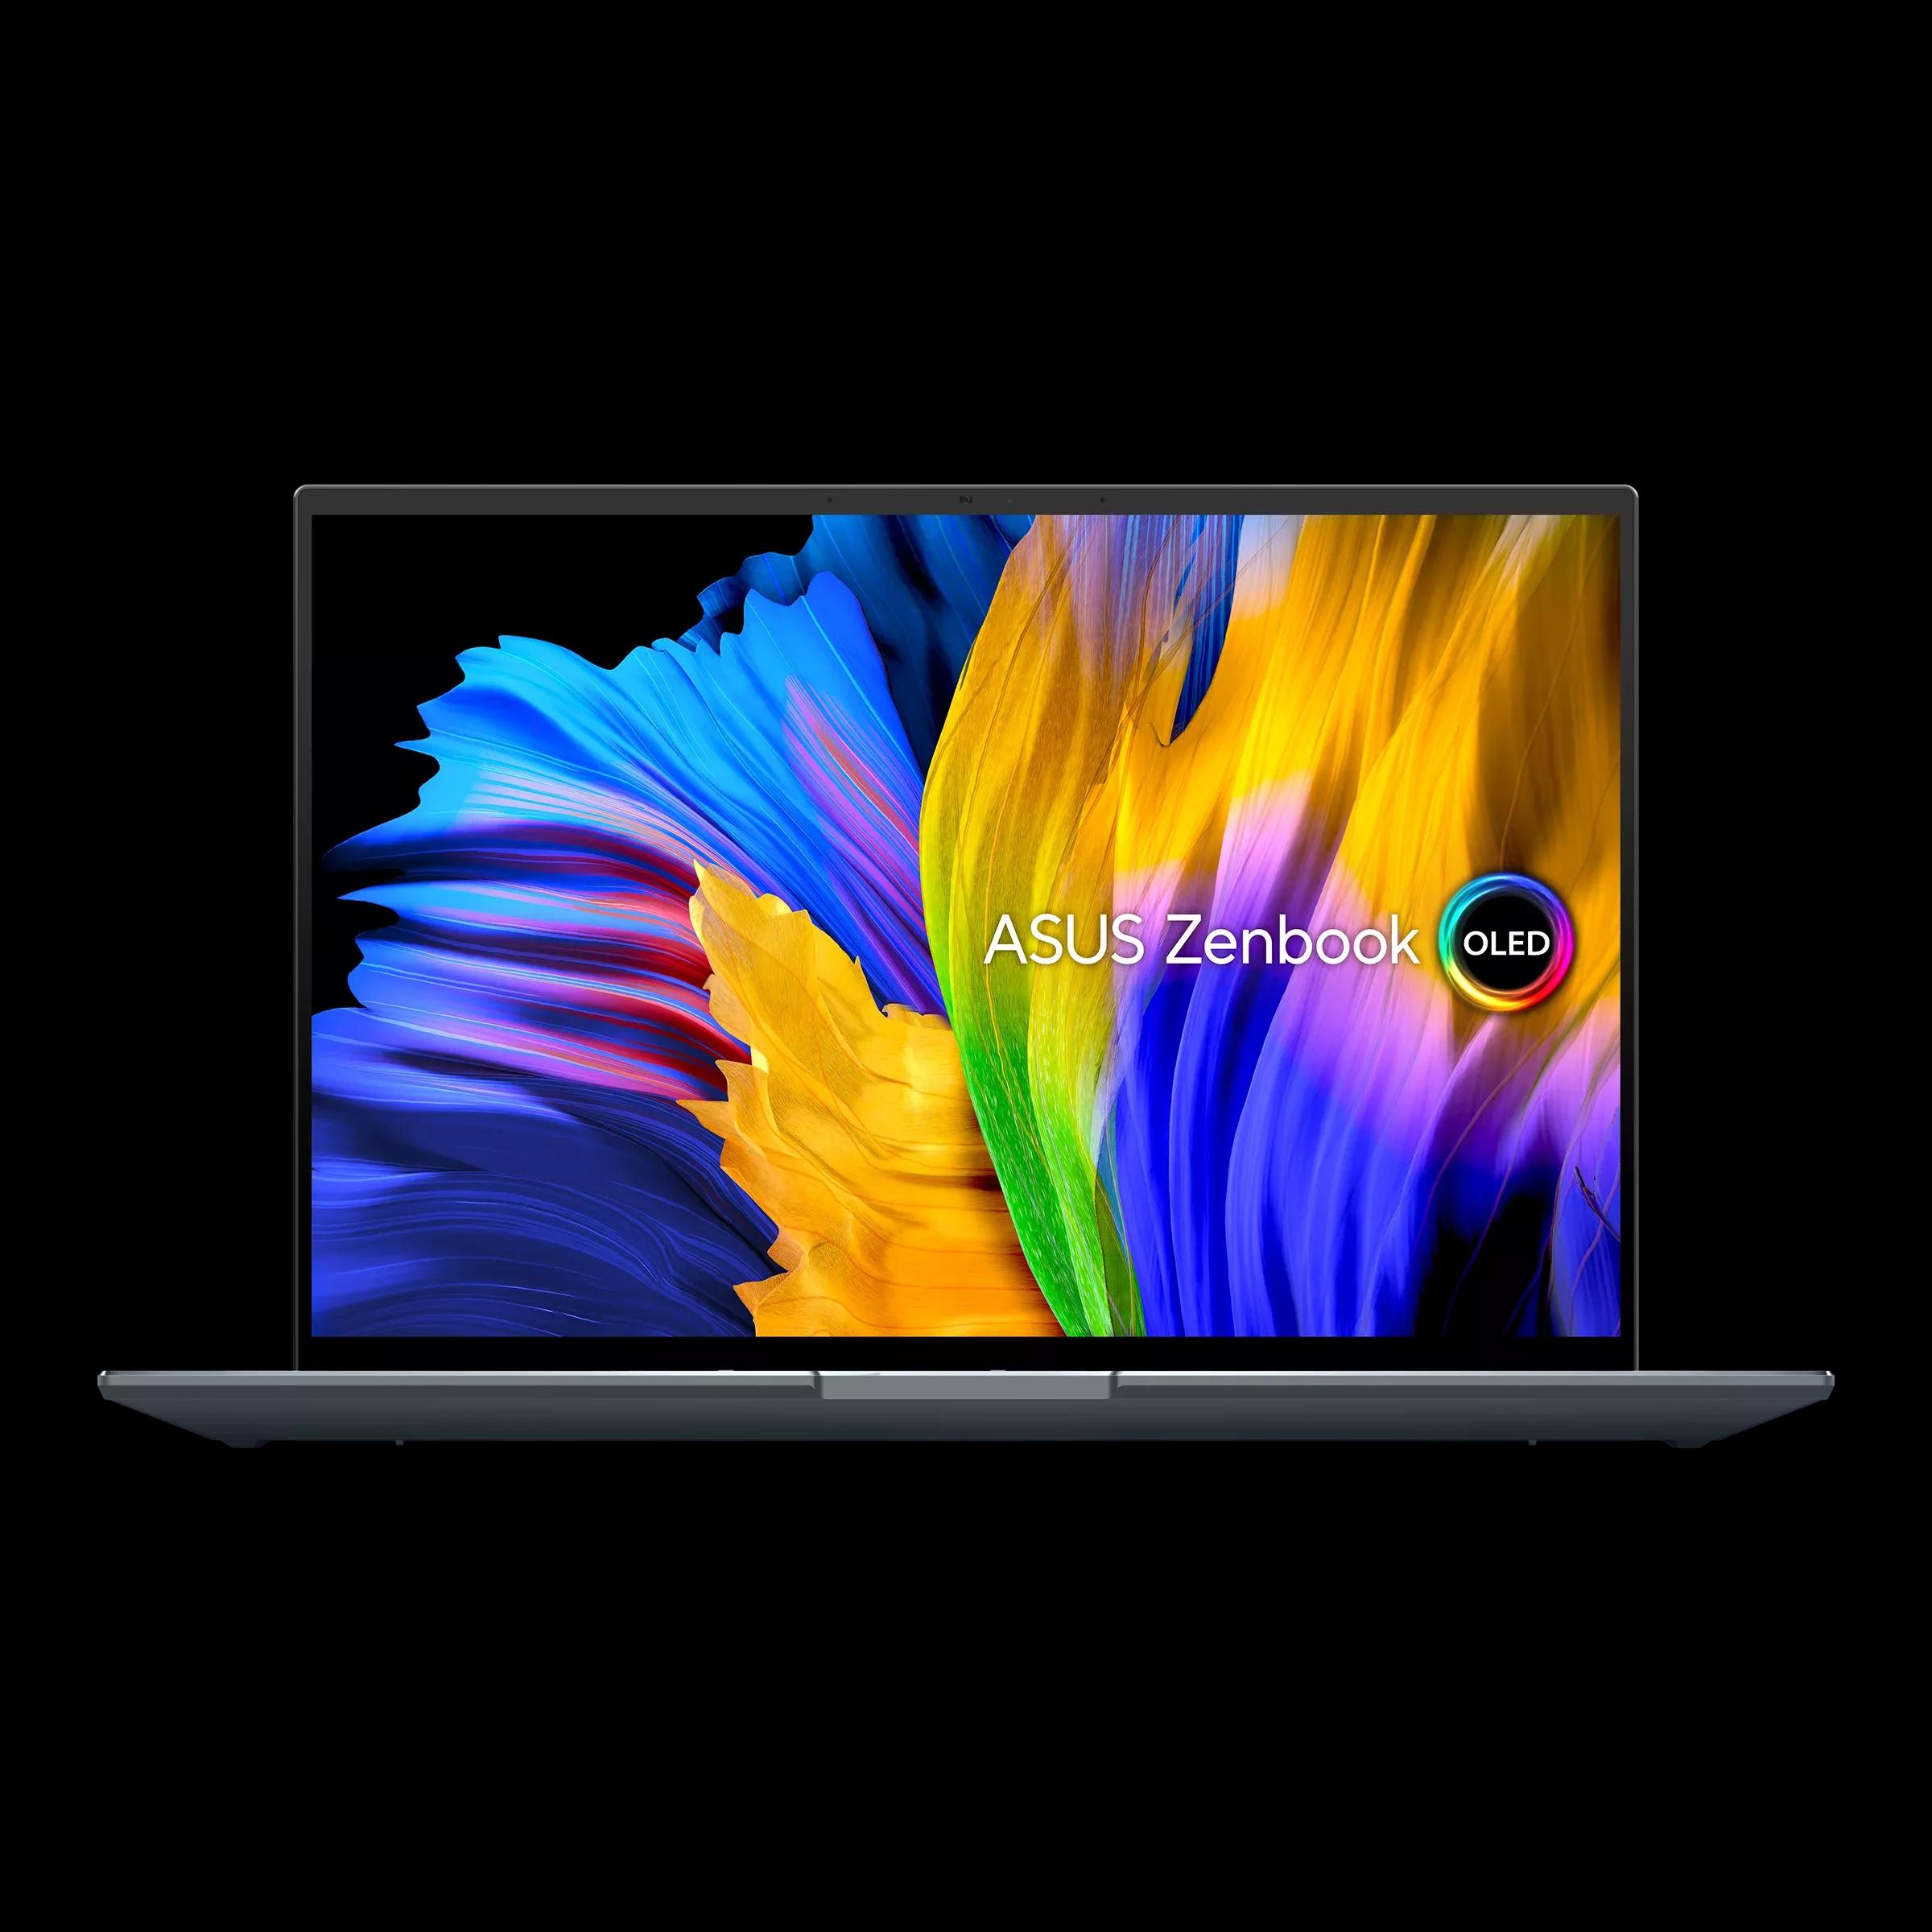 Asus ZenBook 14X OLED UX5400ZB 2022 i7 12th Gen / NVIDIA MX550 / 16GB RAM / 1TB SSD / 14" OLED 4K Touch display